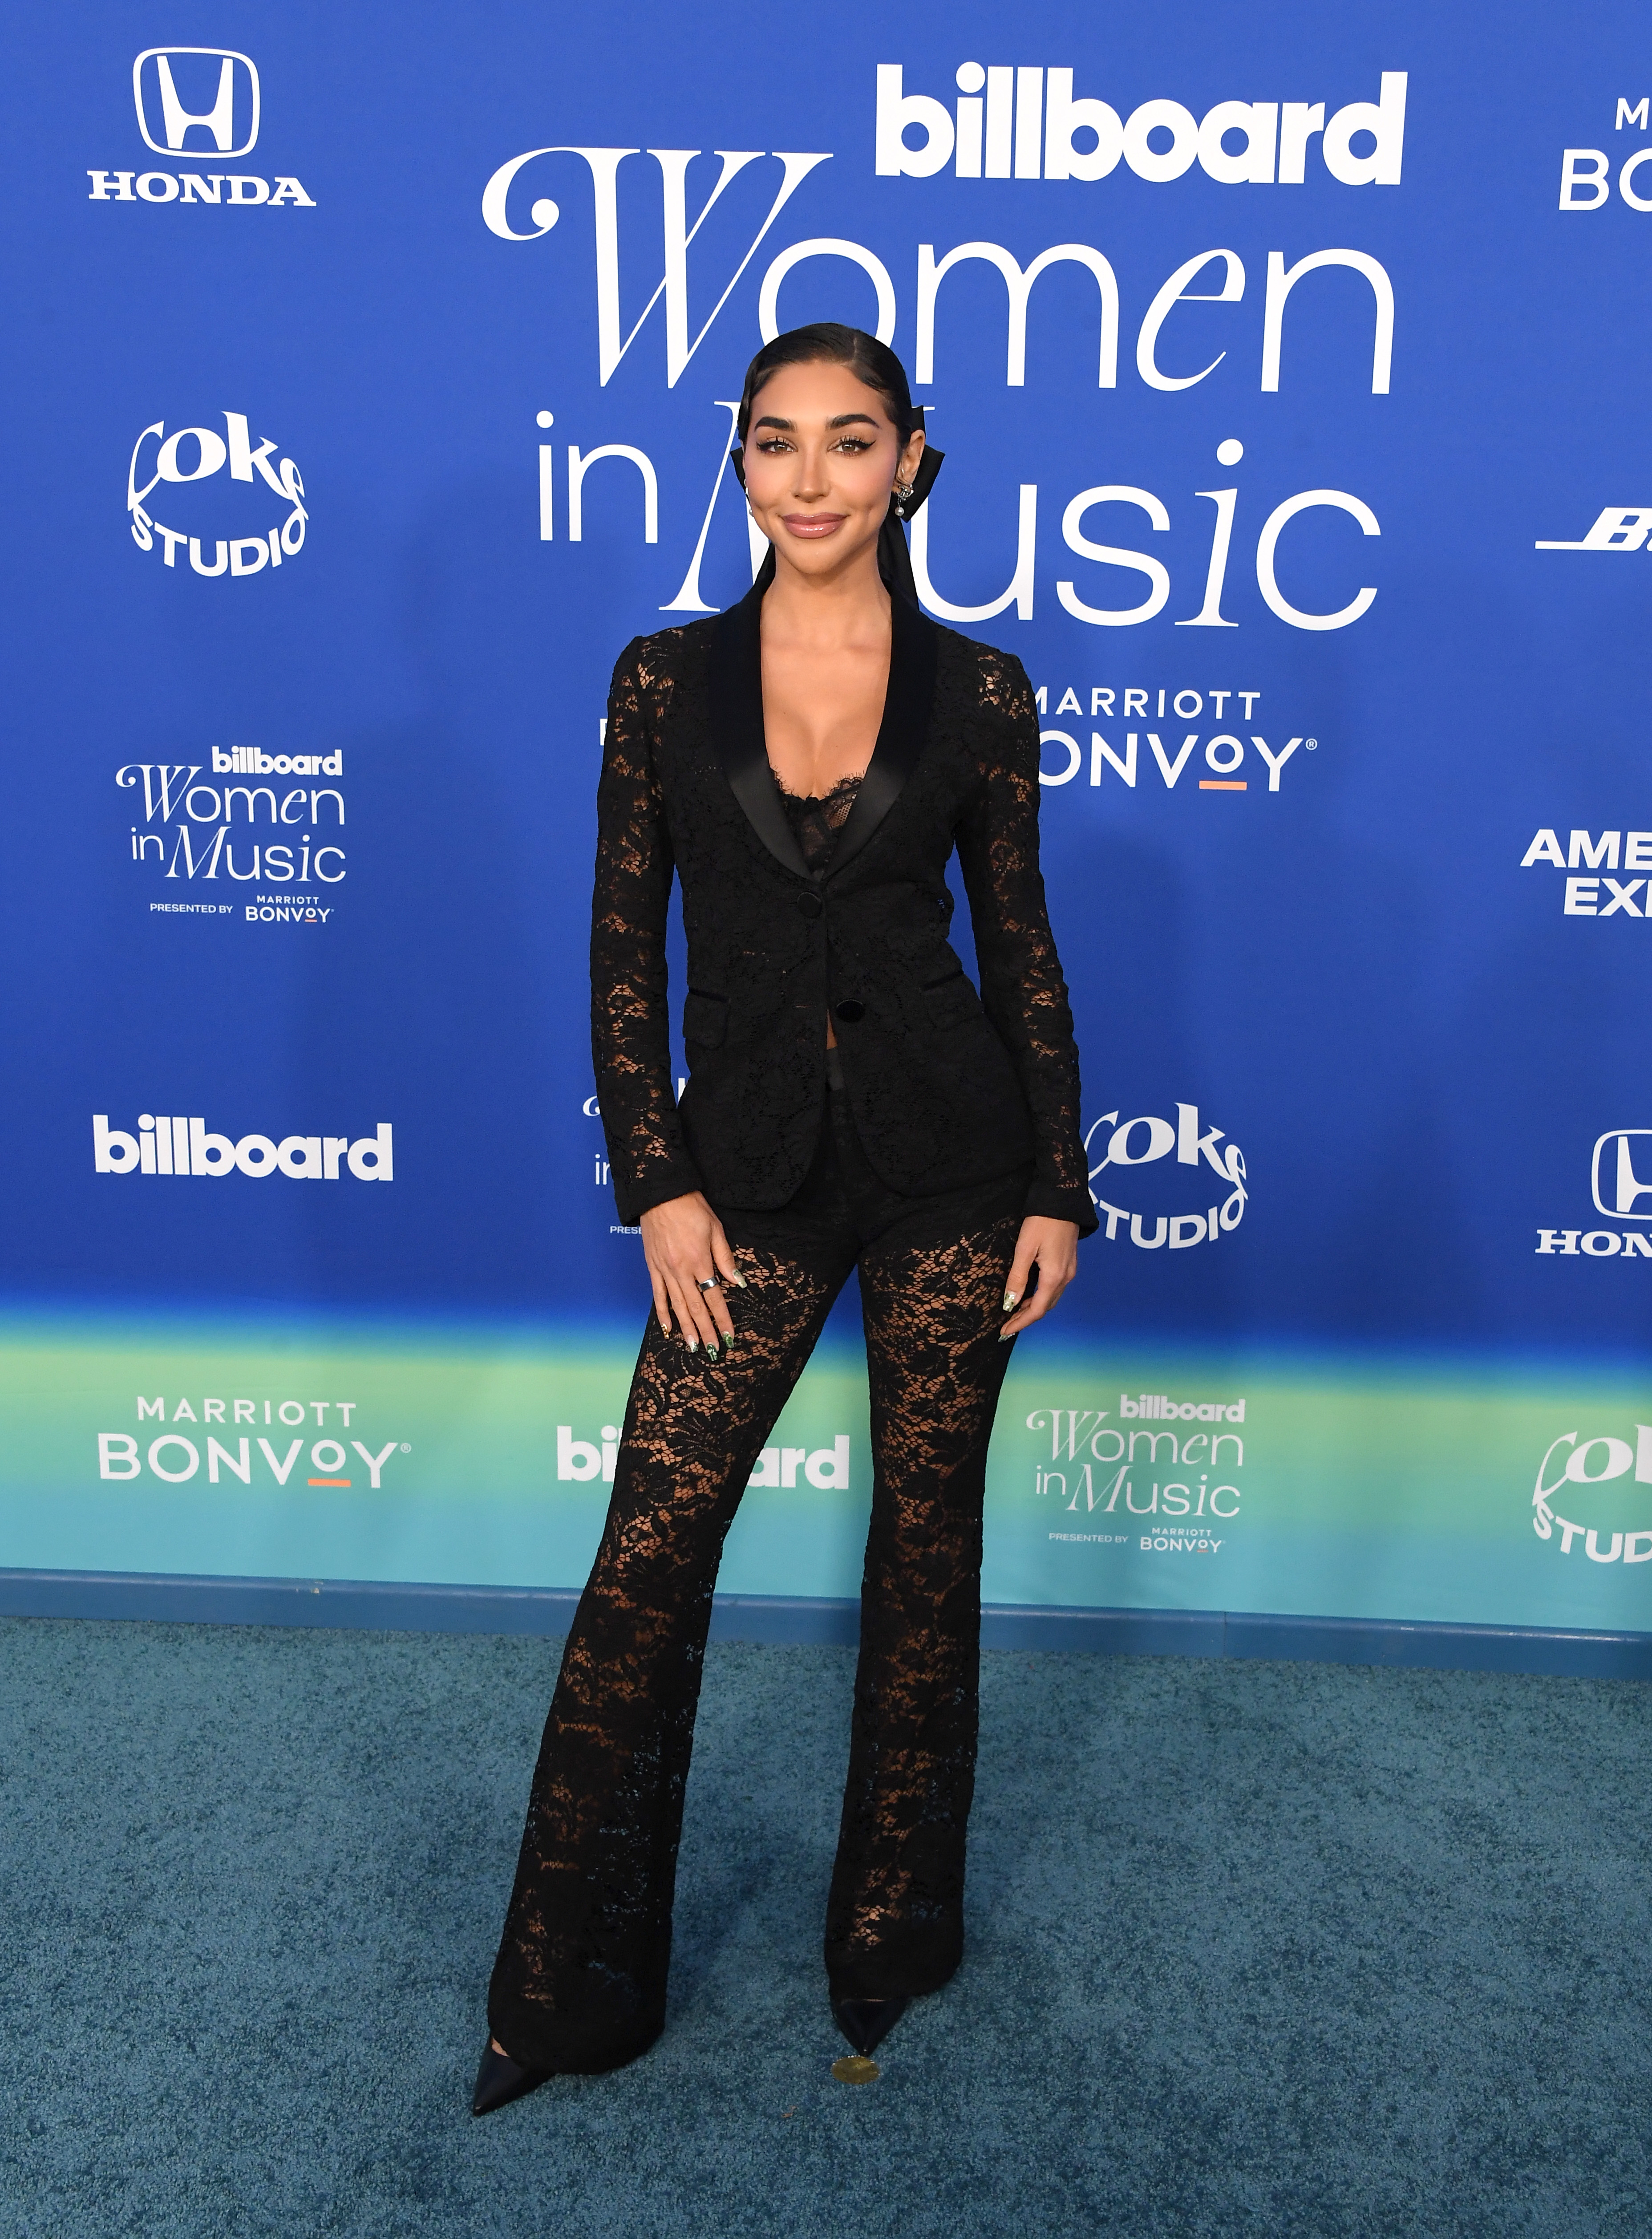 She&#x27;s wearing an embellished black pantsuit with a plunging neckline